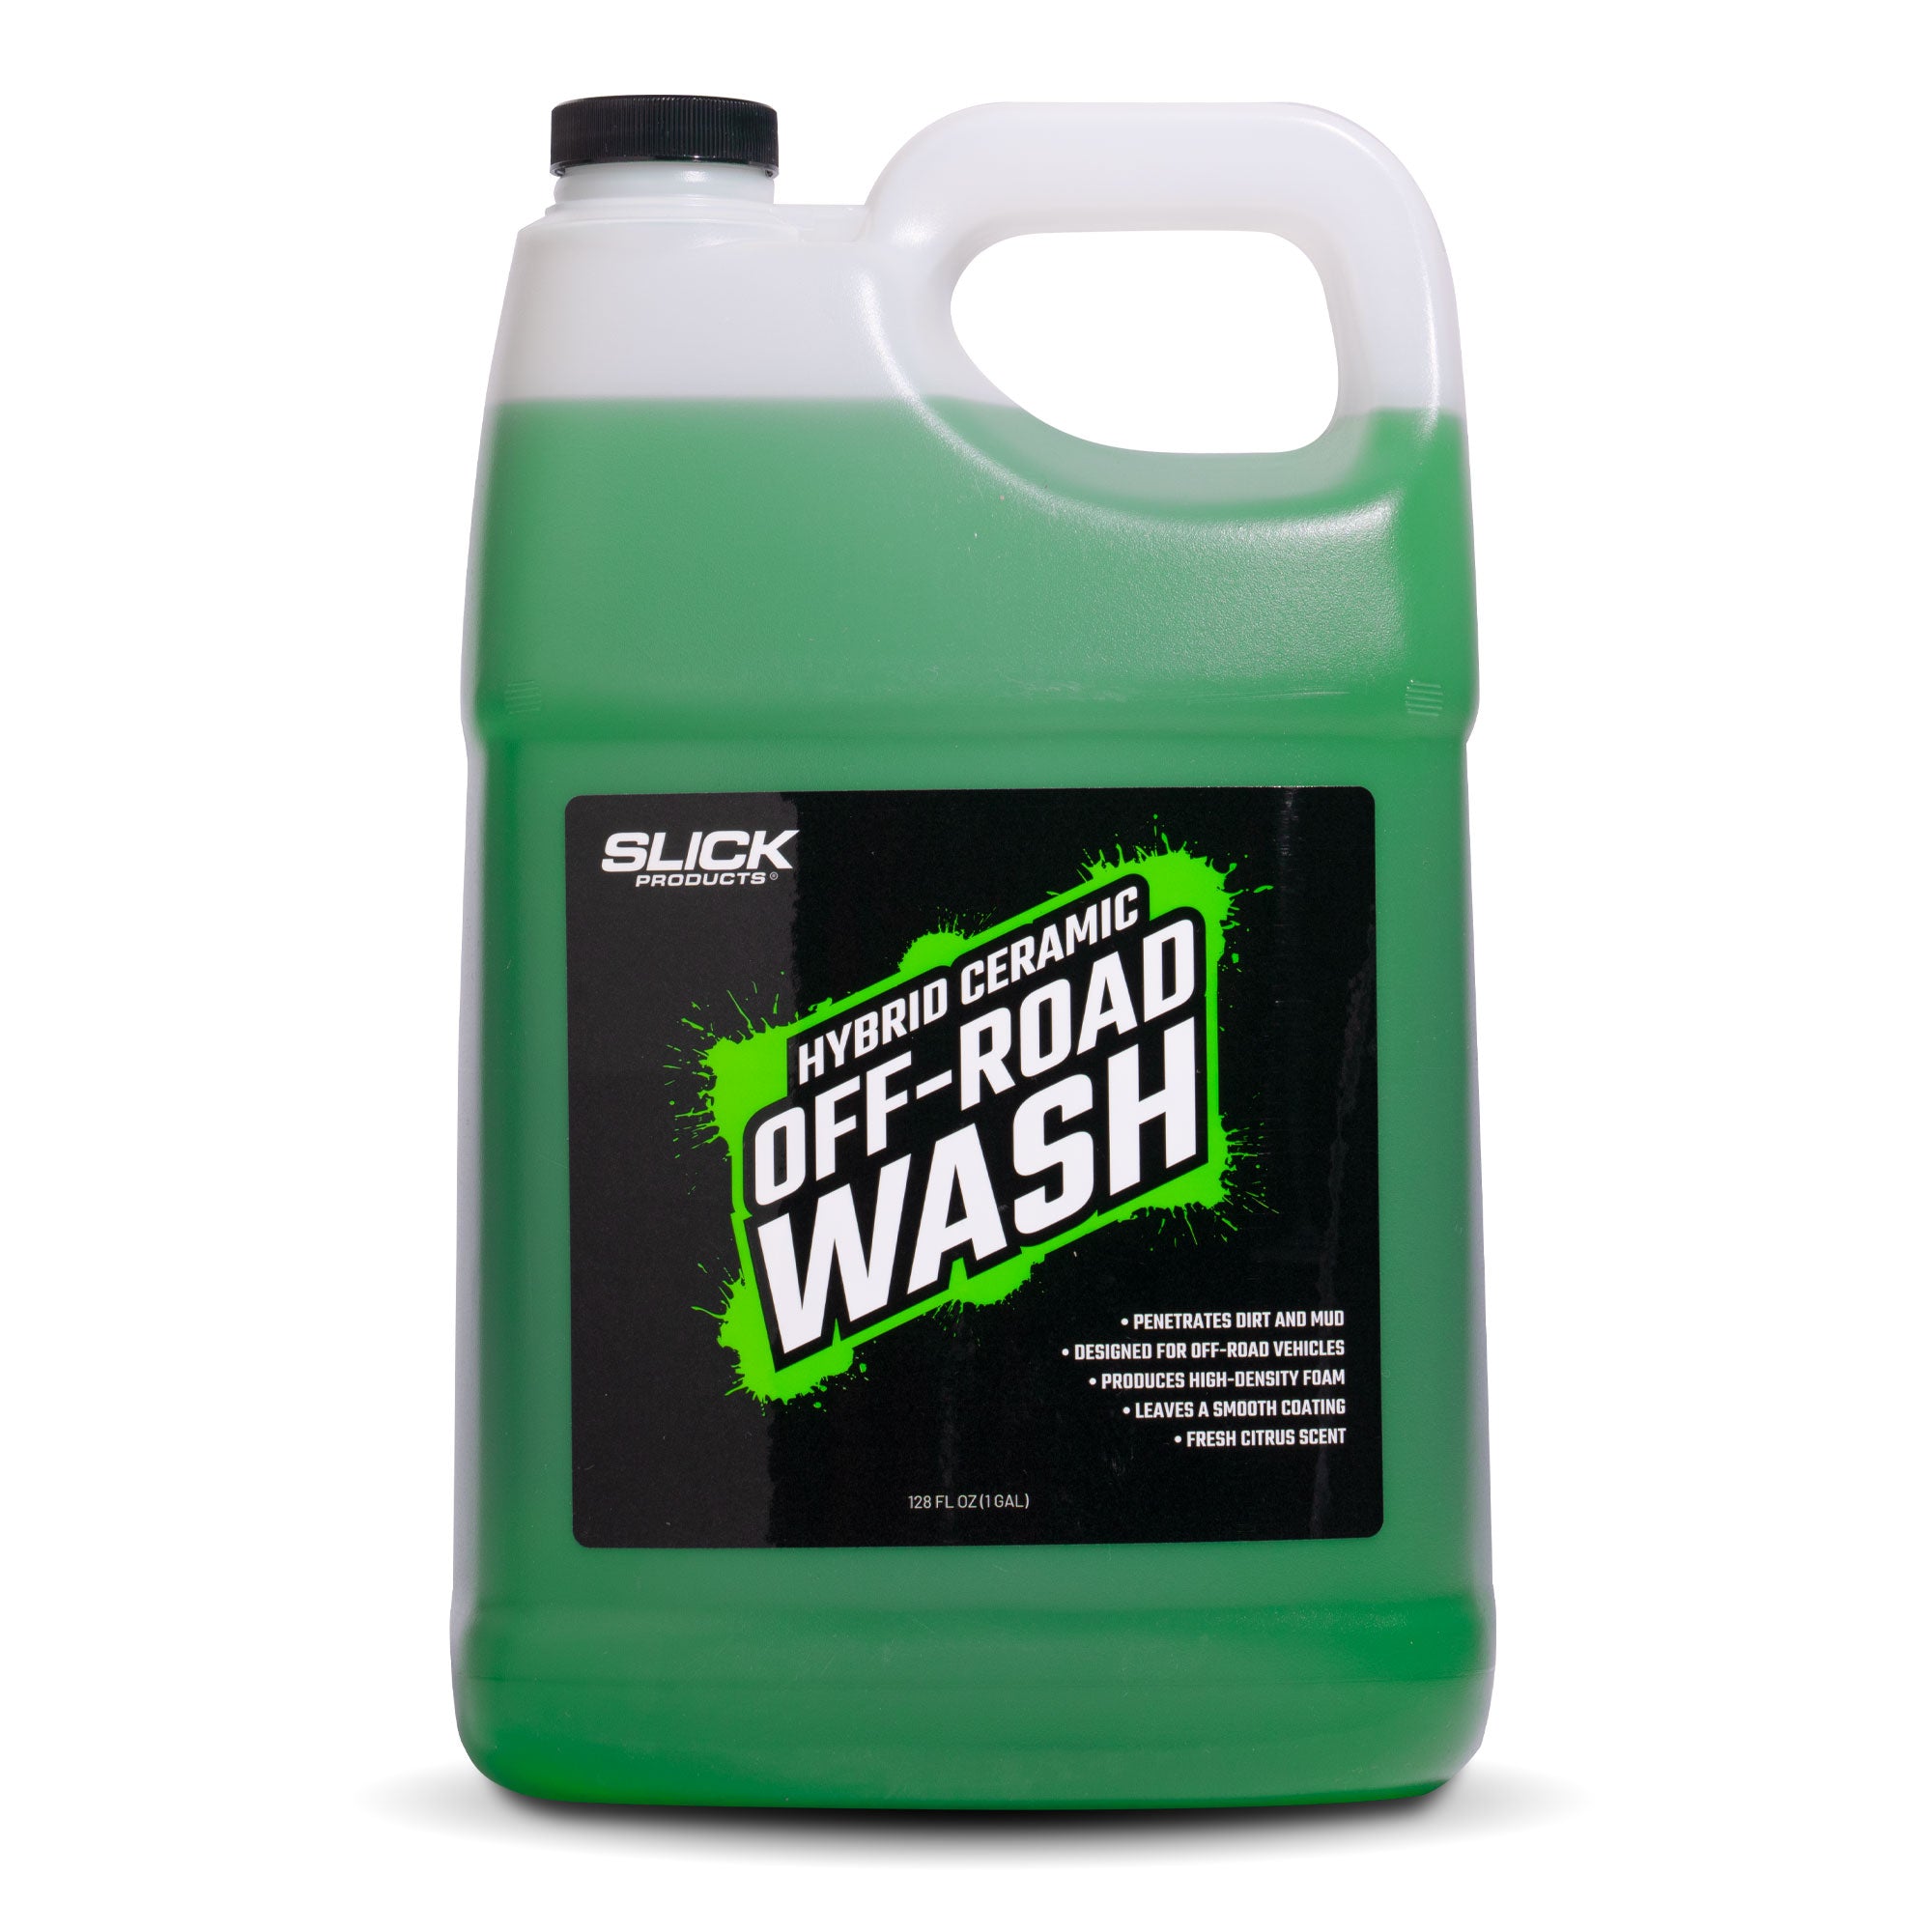 Slick Products Hybrid Ceramic Off-Road Wash - Extra Thick Super Concentrated Cleaning Solution for Dirt Bike, UTV, Side x Side, Truck, Offroad Car